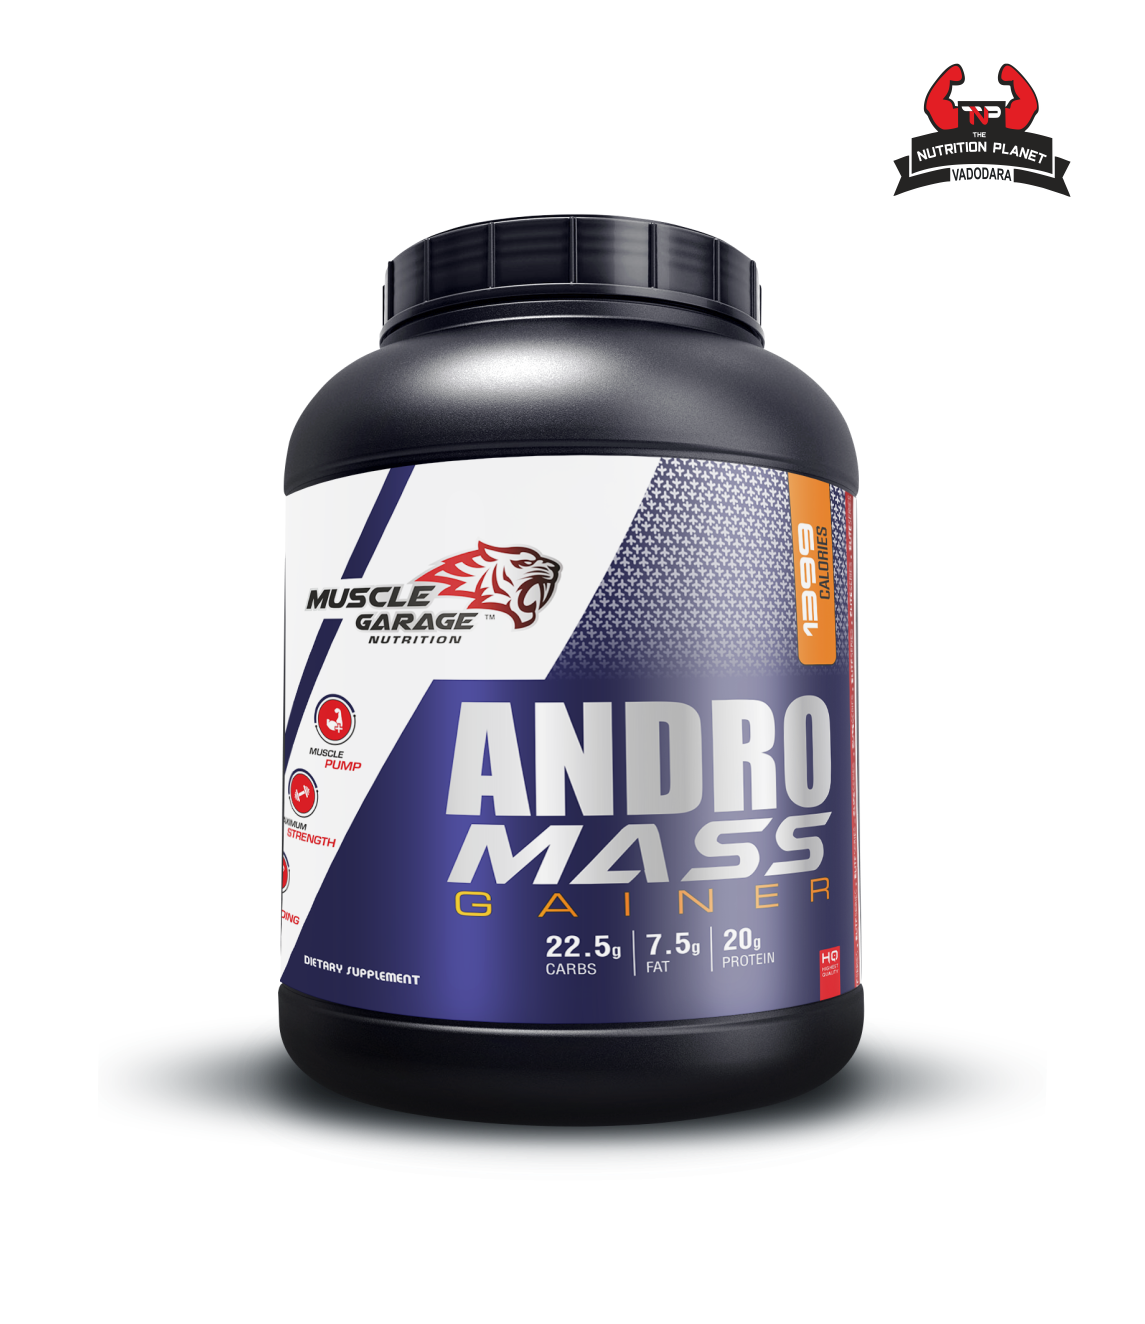 Muscle Garage ANDRO MASS GAINER with official Authentic Tag